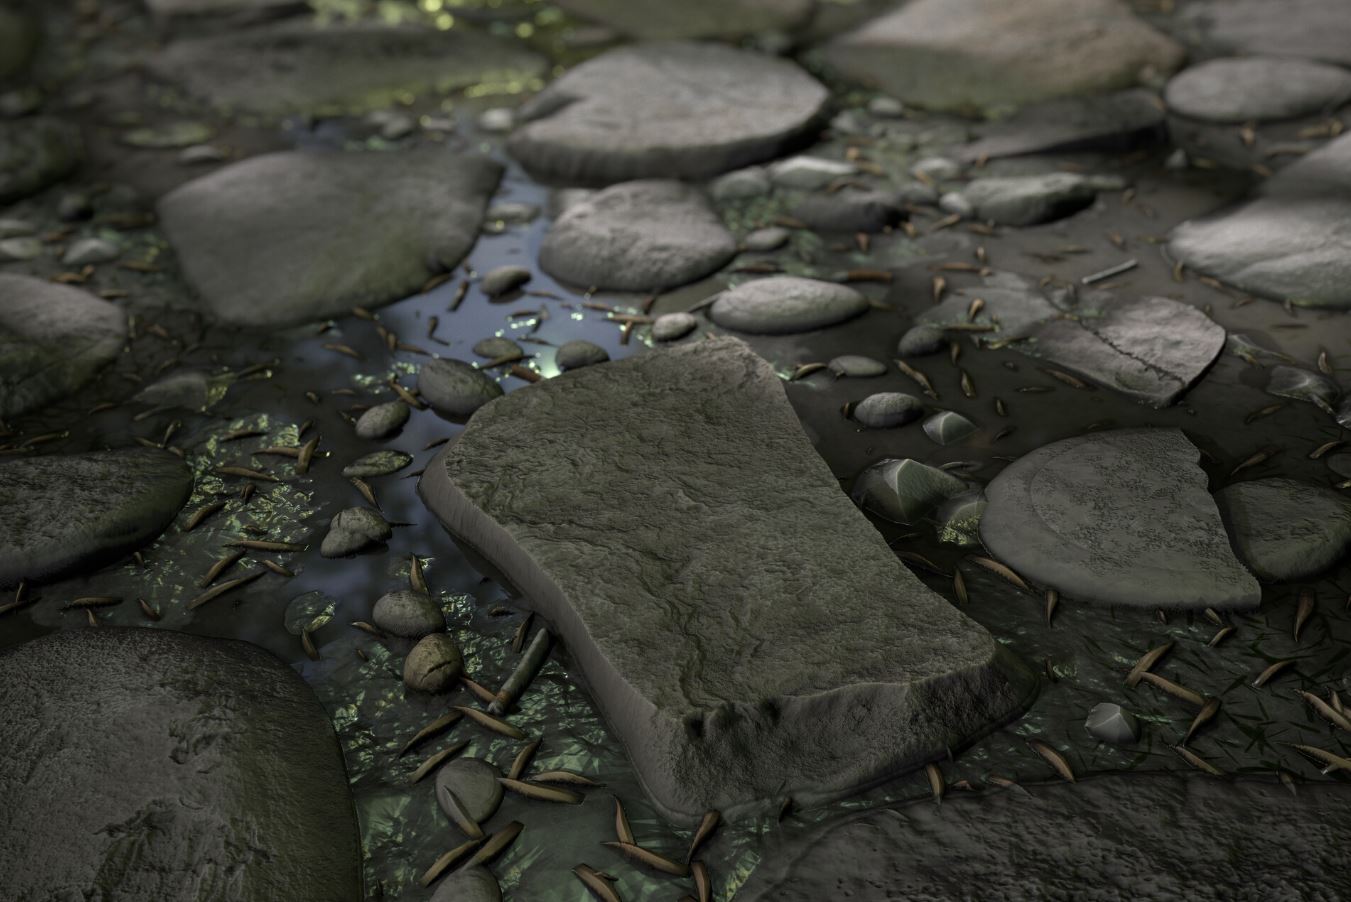 How to build the rock in the foreground in Substance Designer